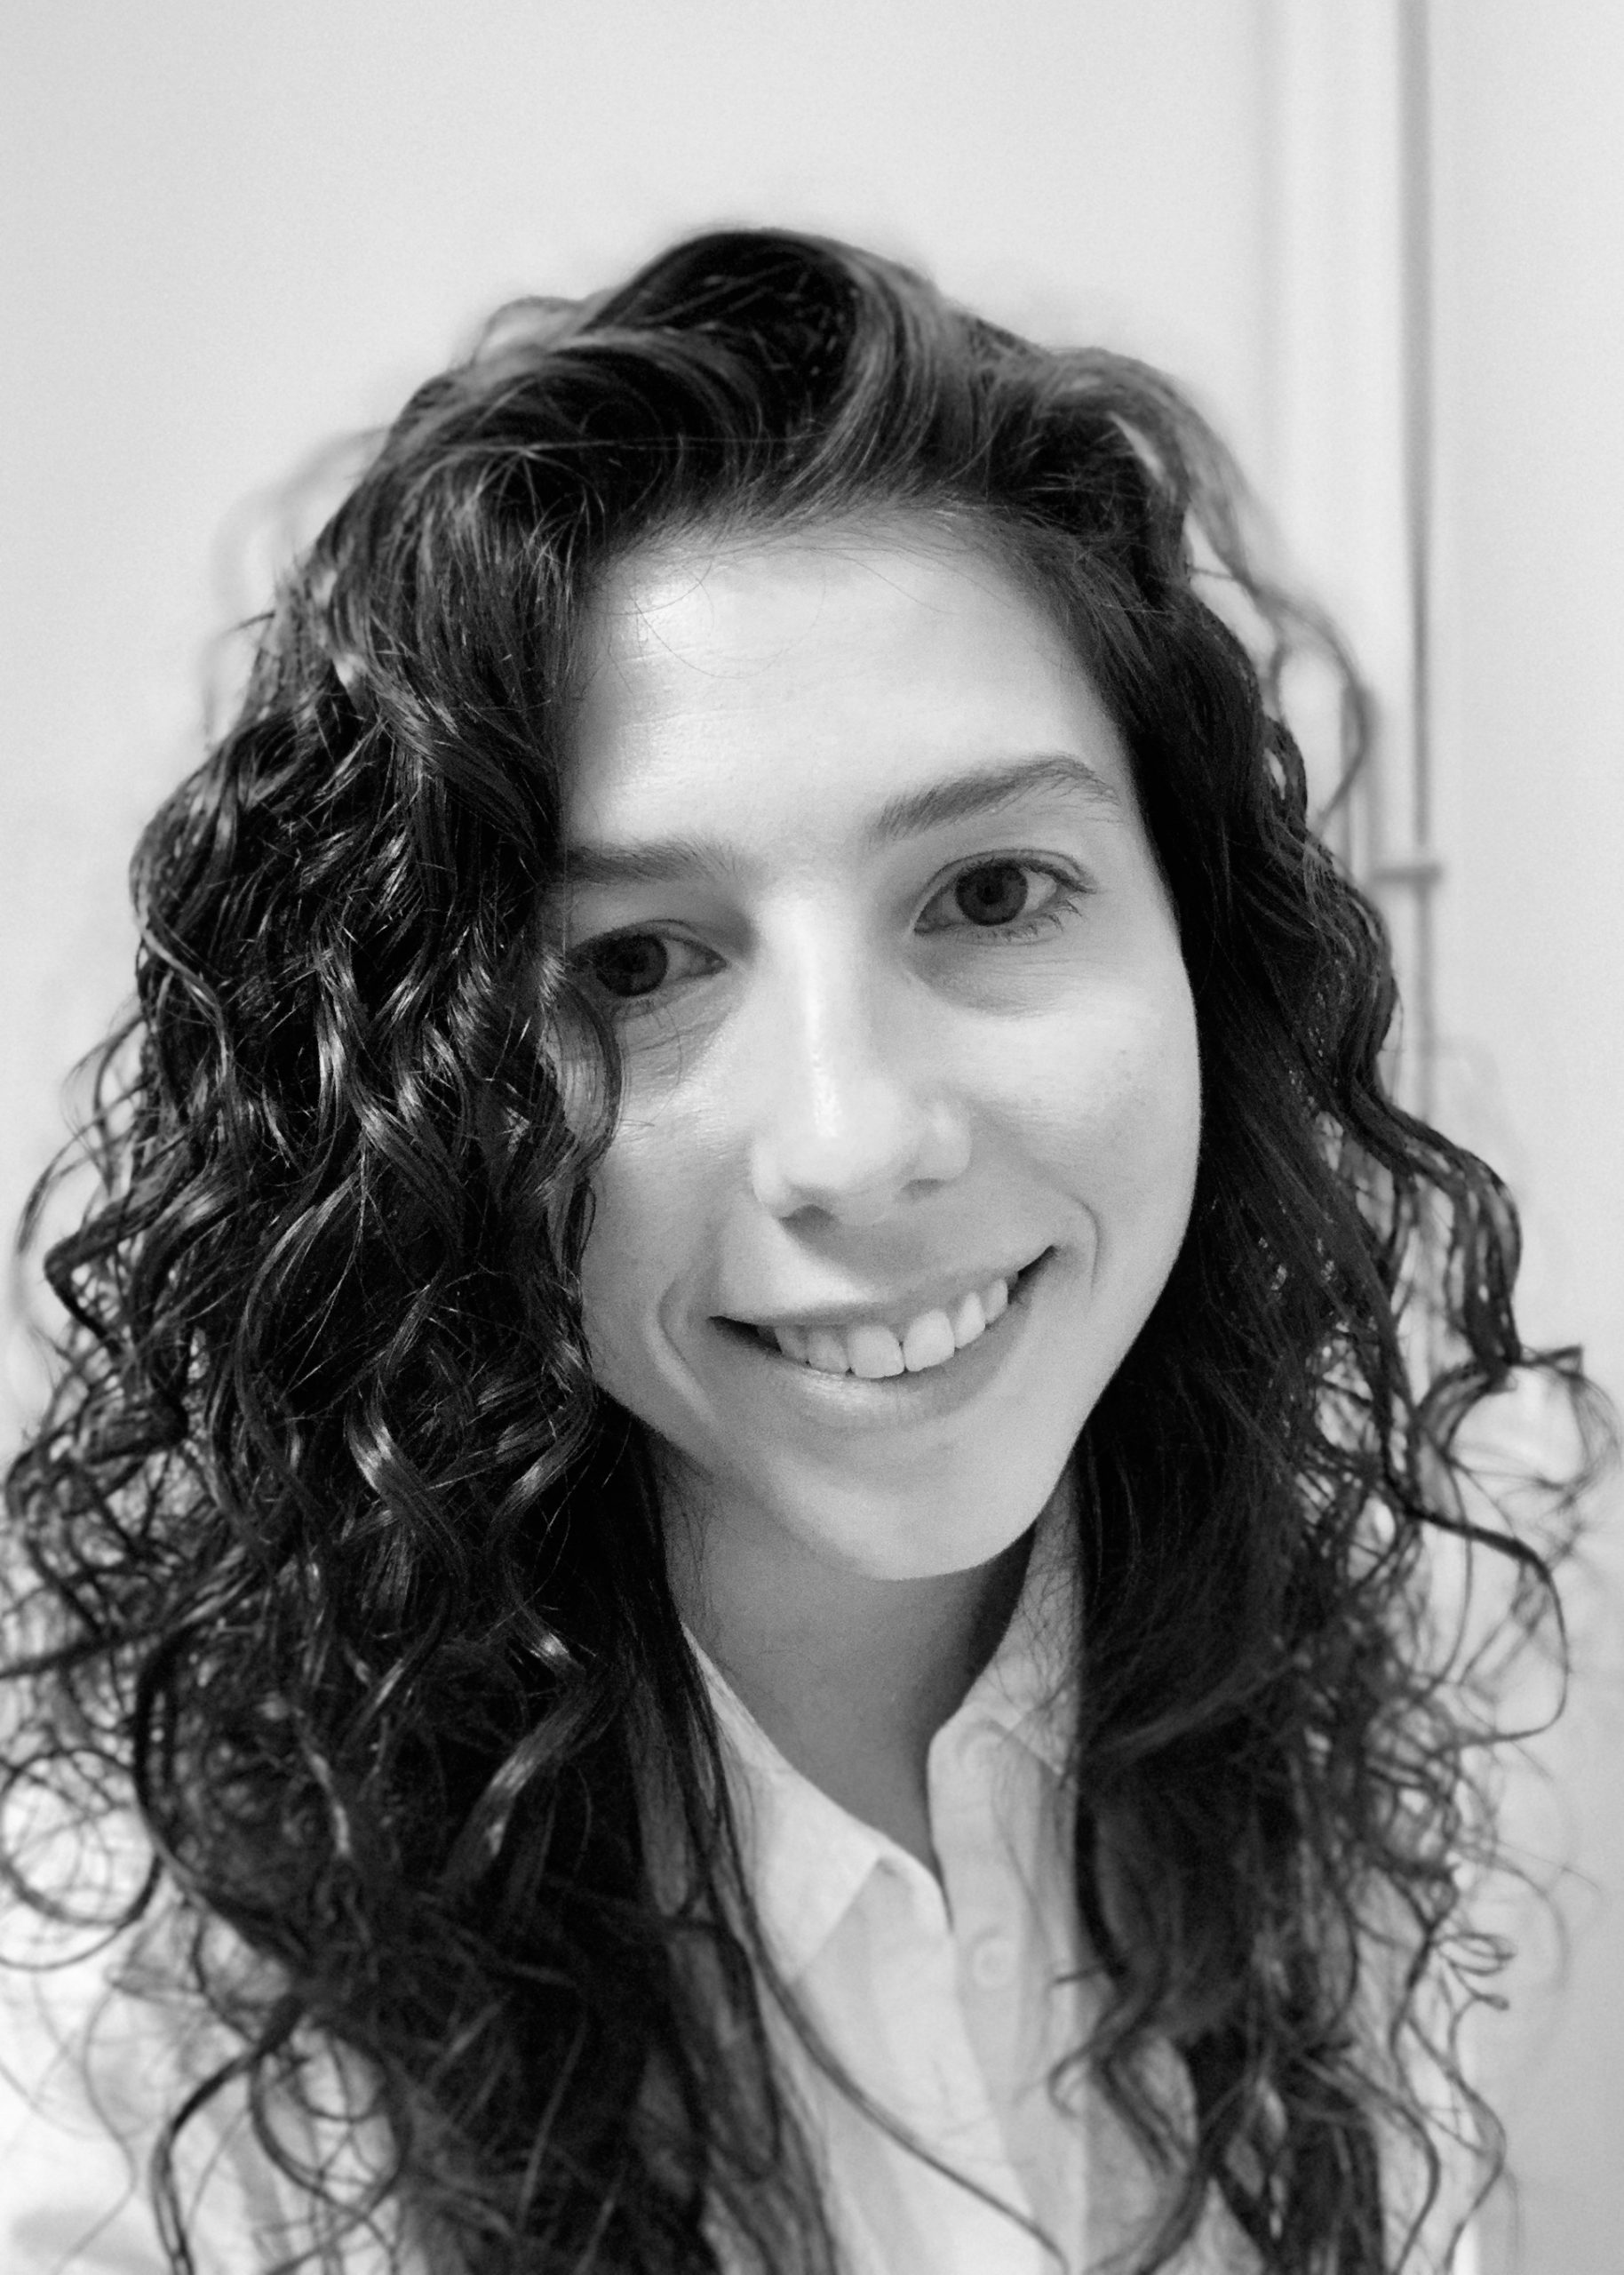 Meet Mary Al-Sayed, Our New Editor for Anthropology & History